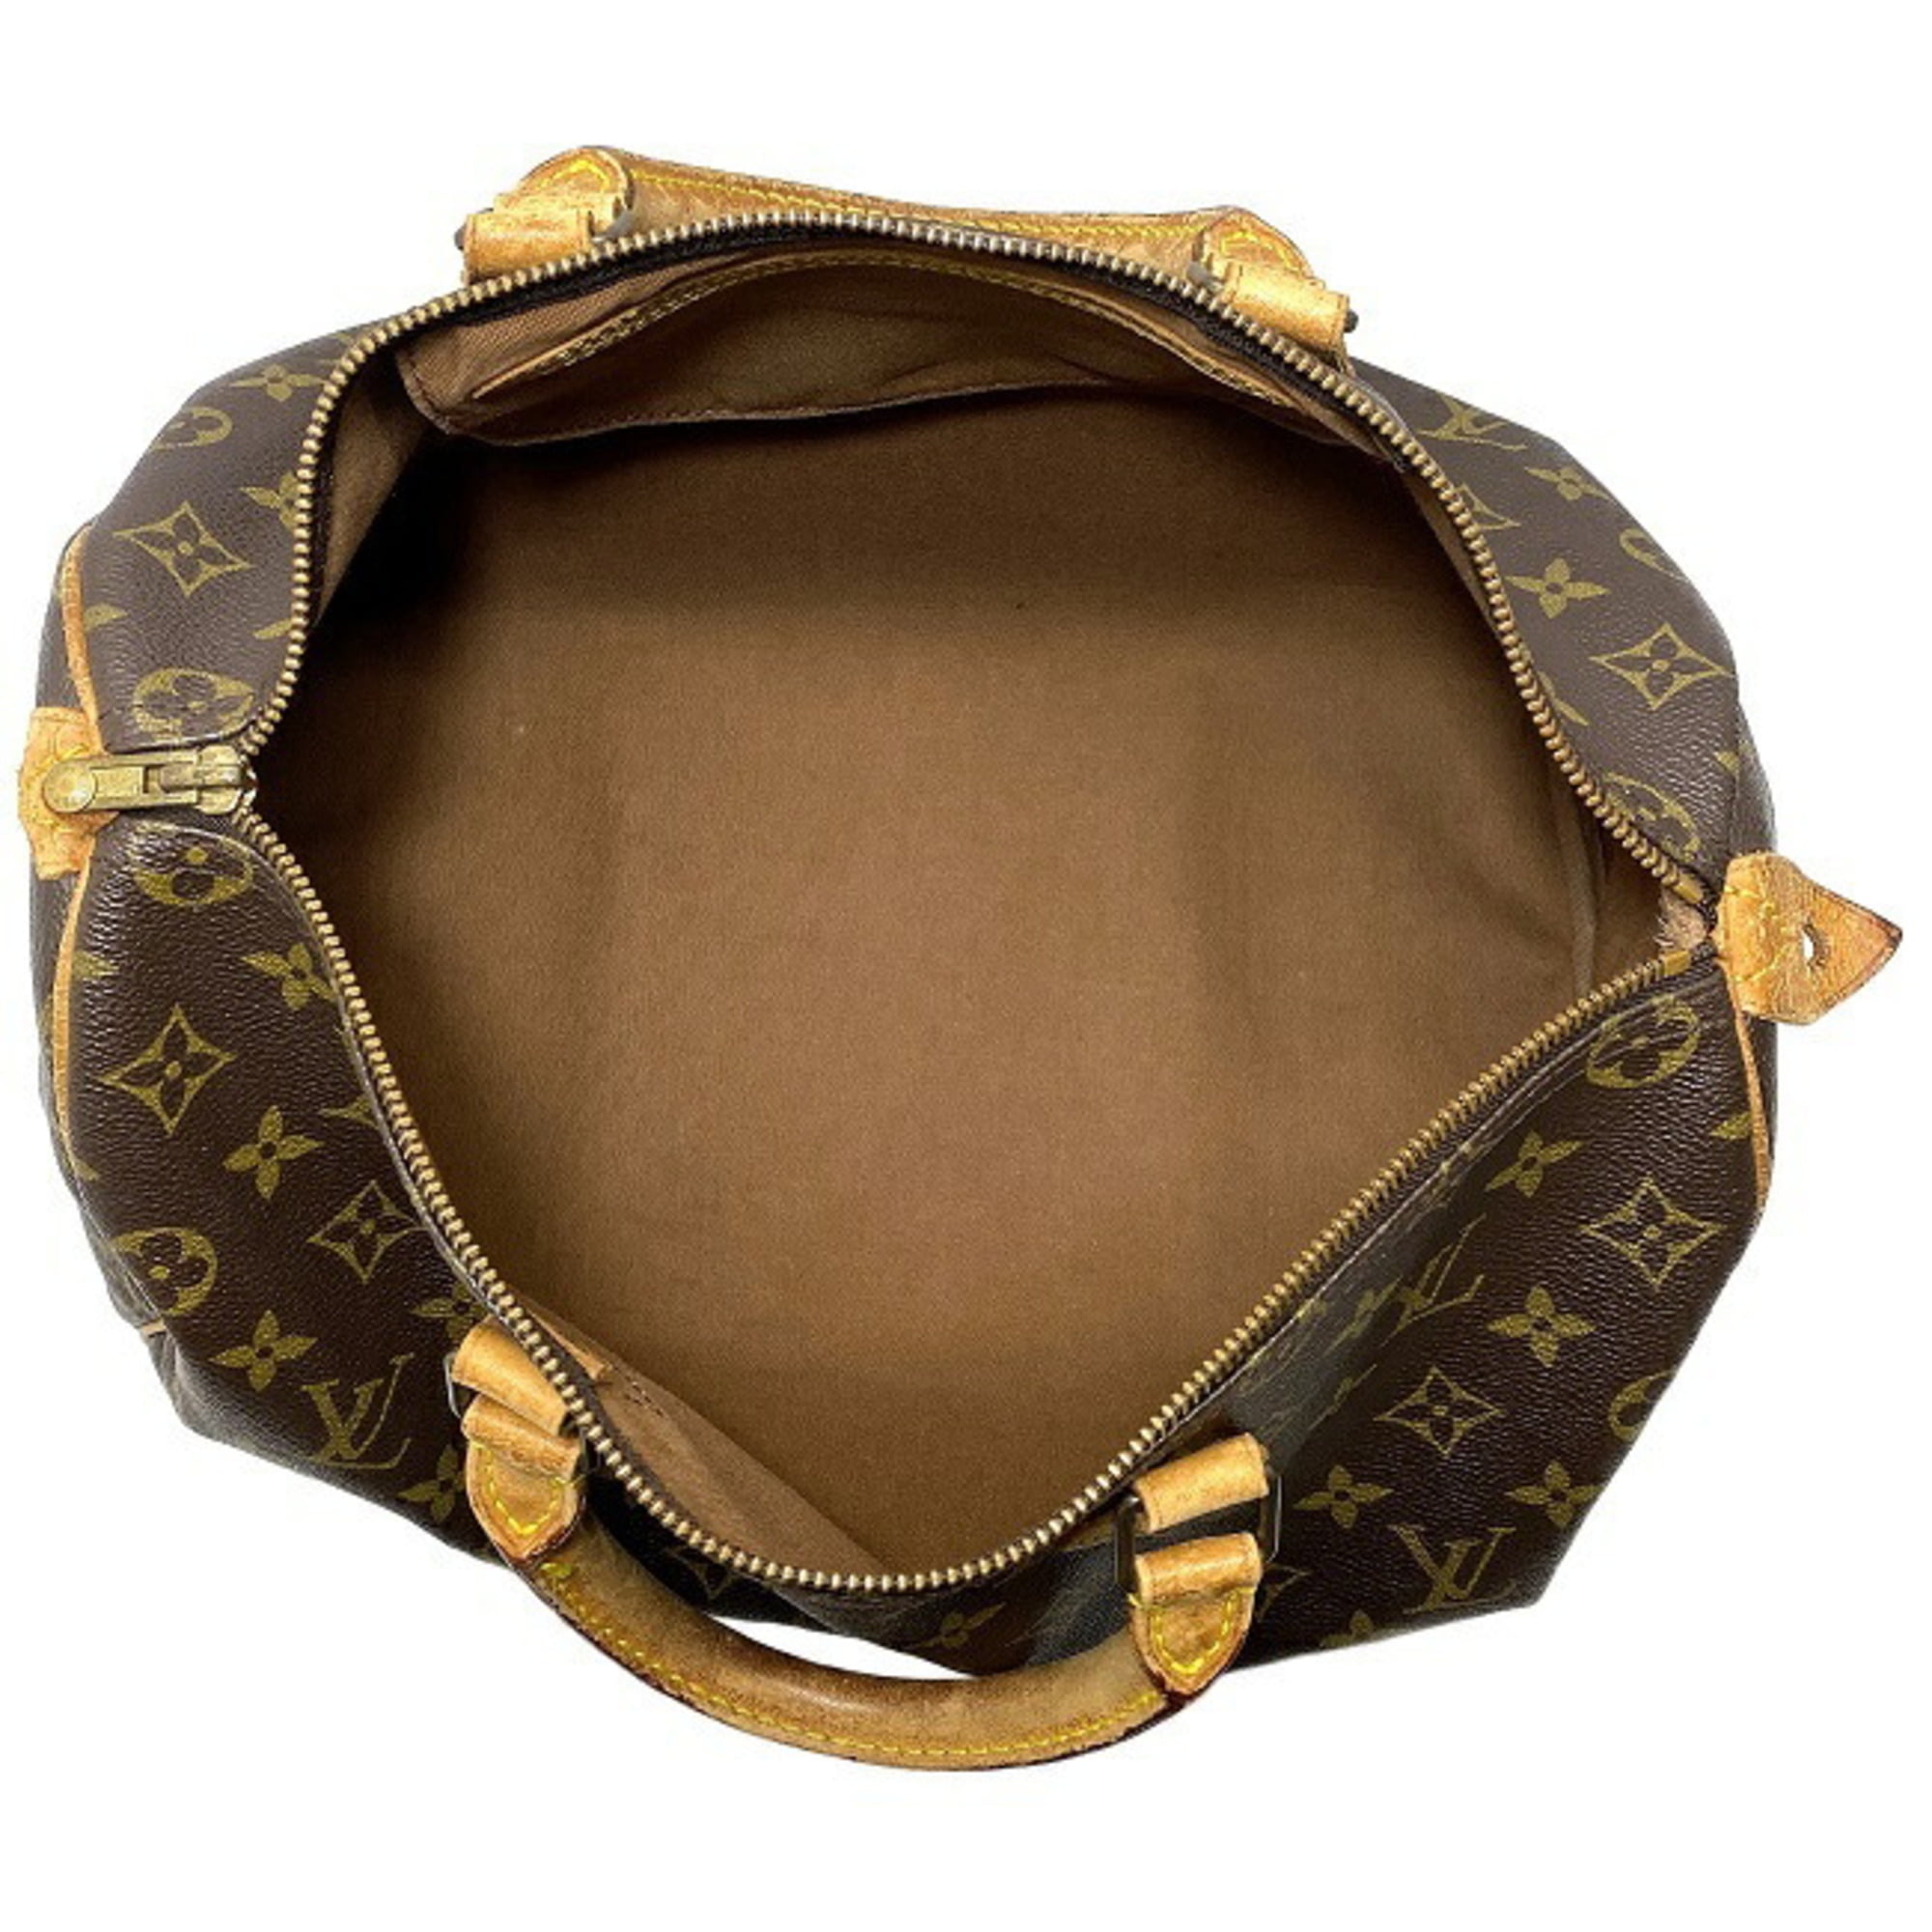 Buy Online Louis Vuitton-Speedy 30-M41526 at Affordable Price